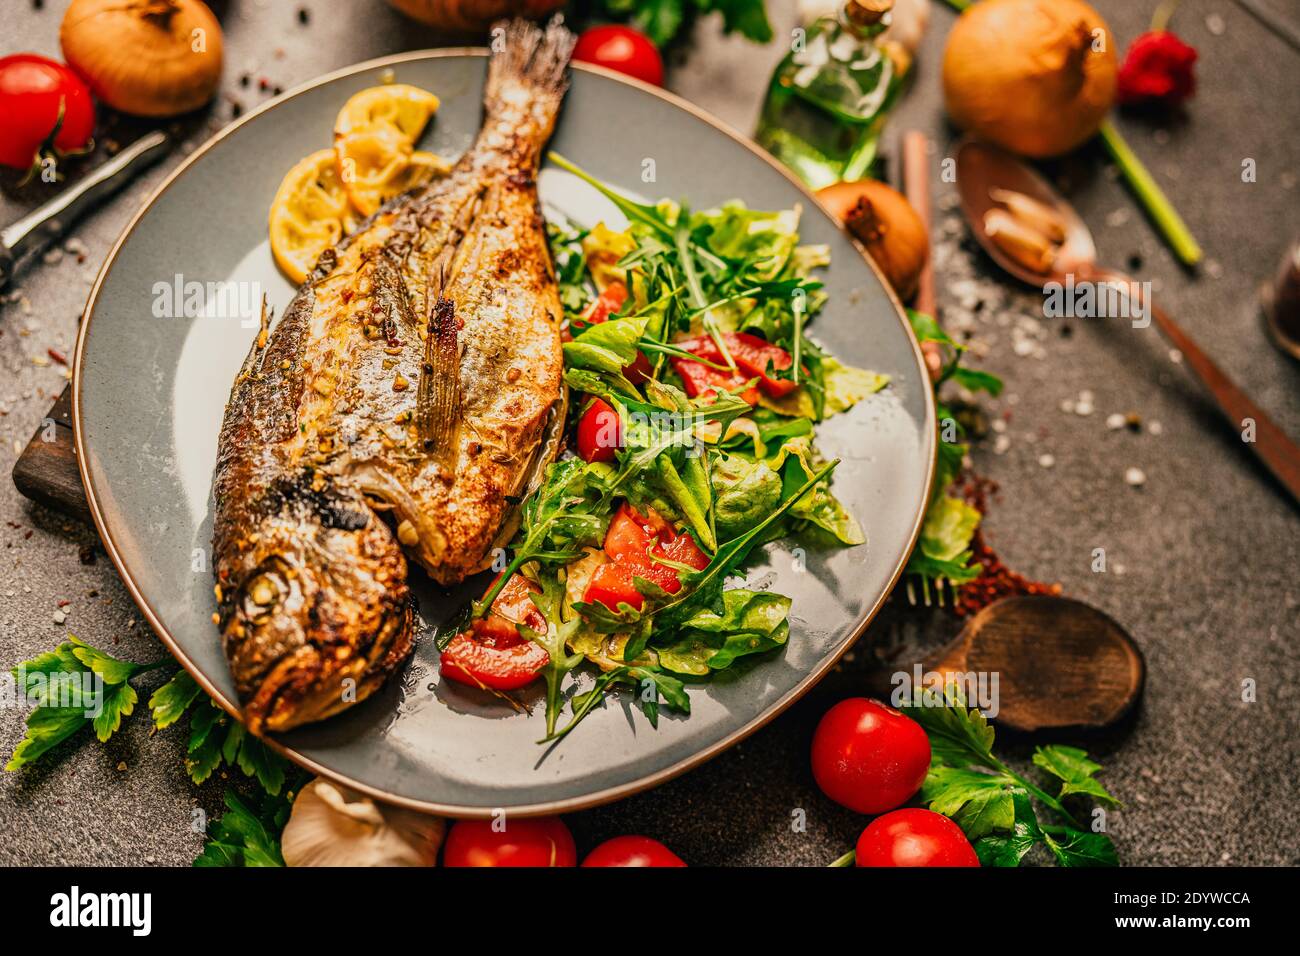 Prepared grilled gilthead sea bream.Fish diet meal.Seafood and vegetables for good health.Expensive dorado fish recipe.Healthy Mediterranean diet.Maki Stock Photo